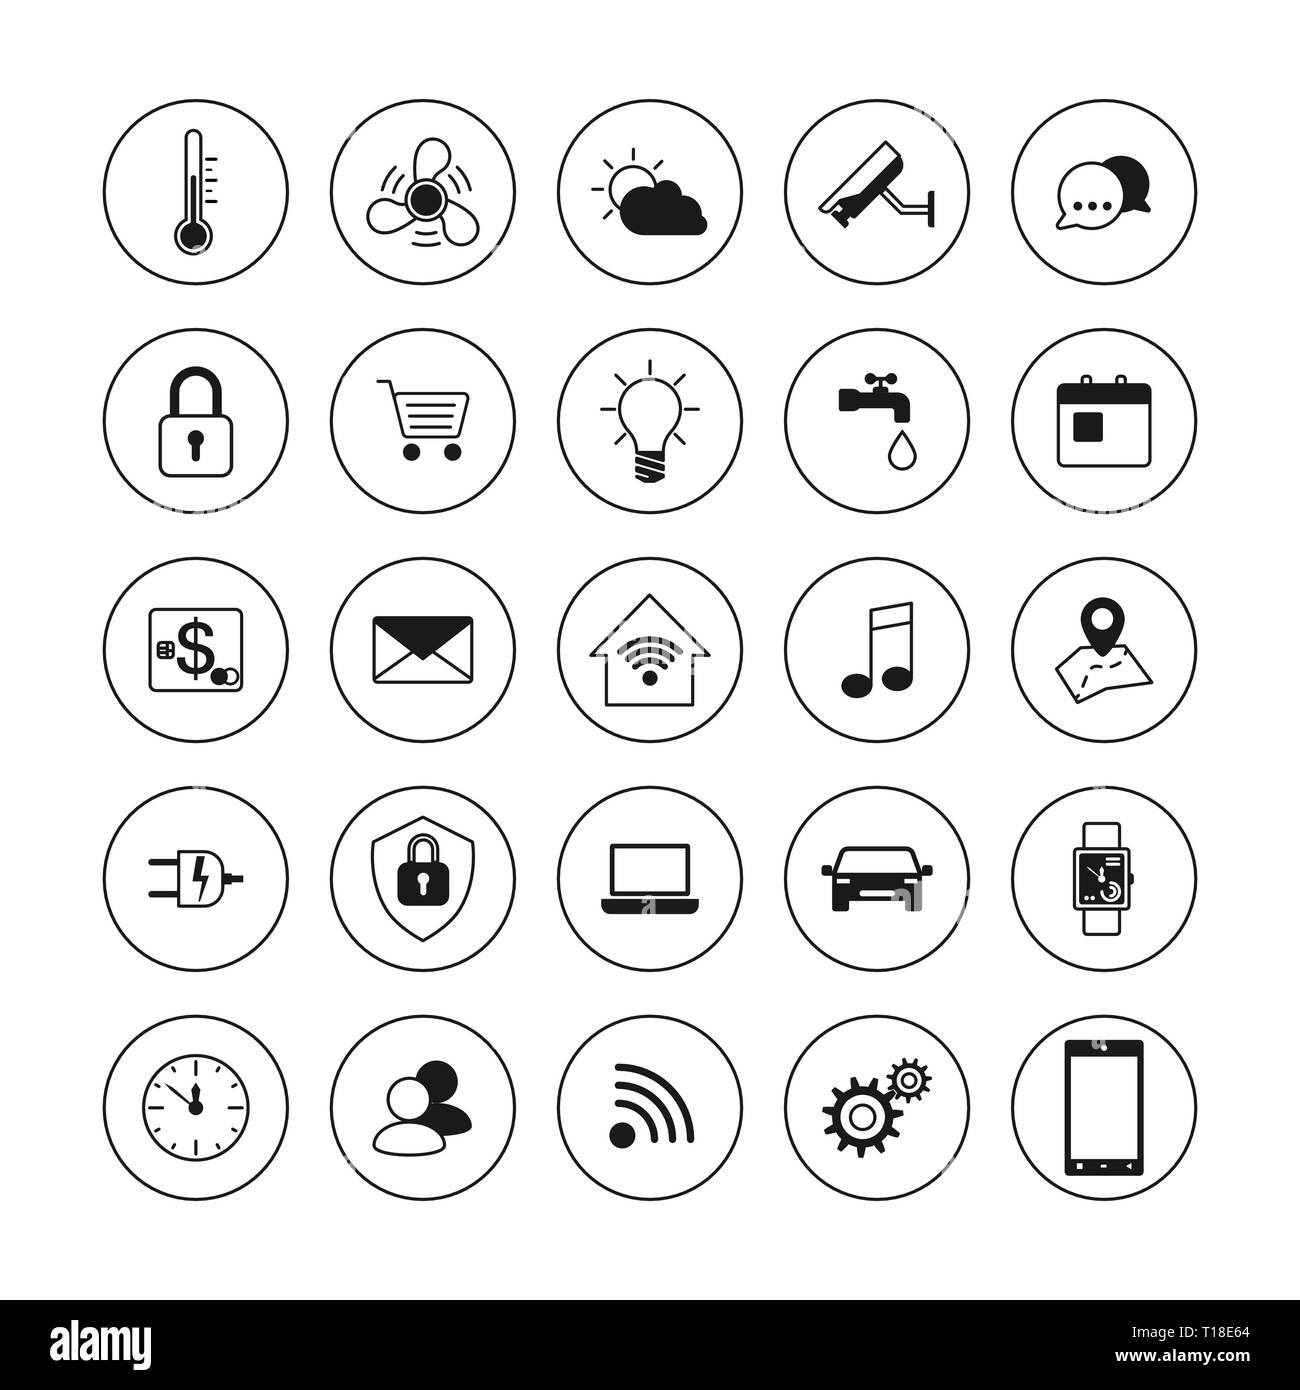 Technology icons. Smart house icons set. Internet of things concept. Smart home element system. Vector illustration Stock Vector